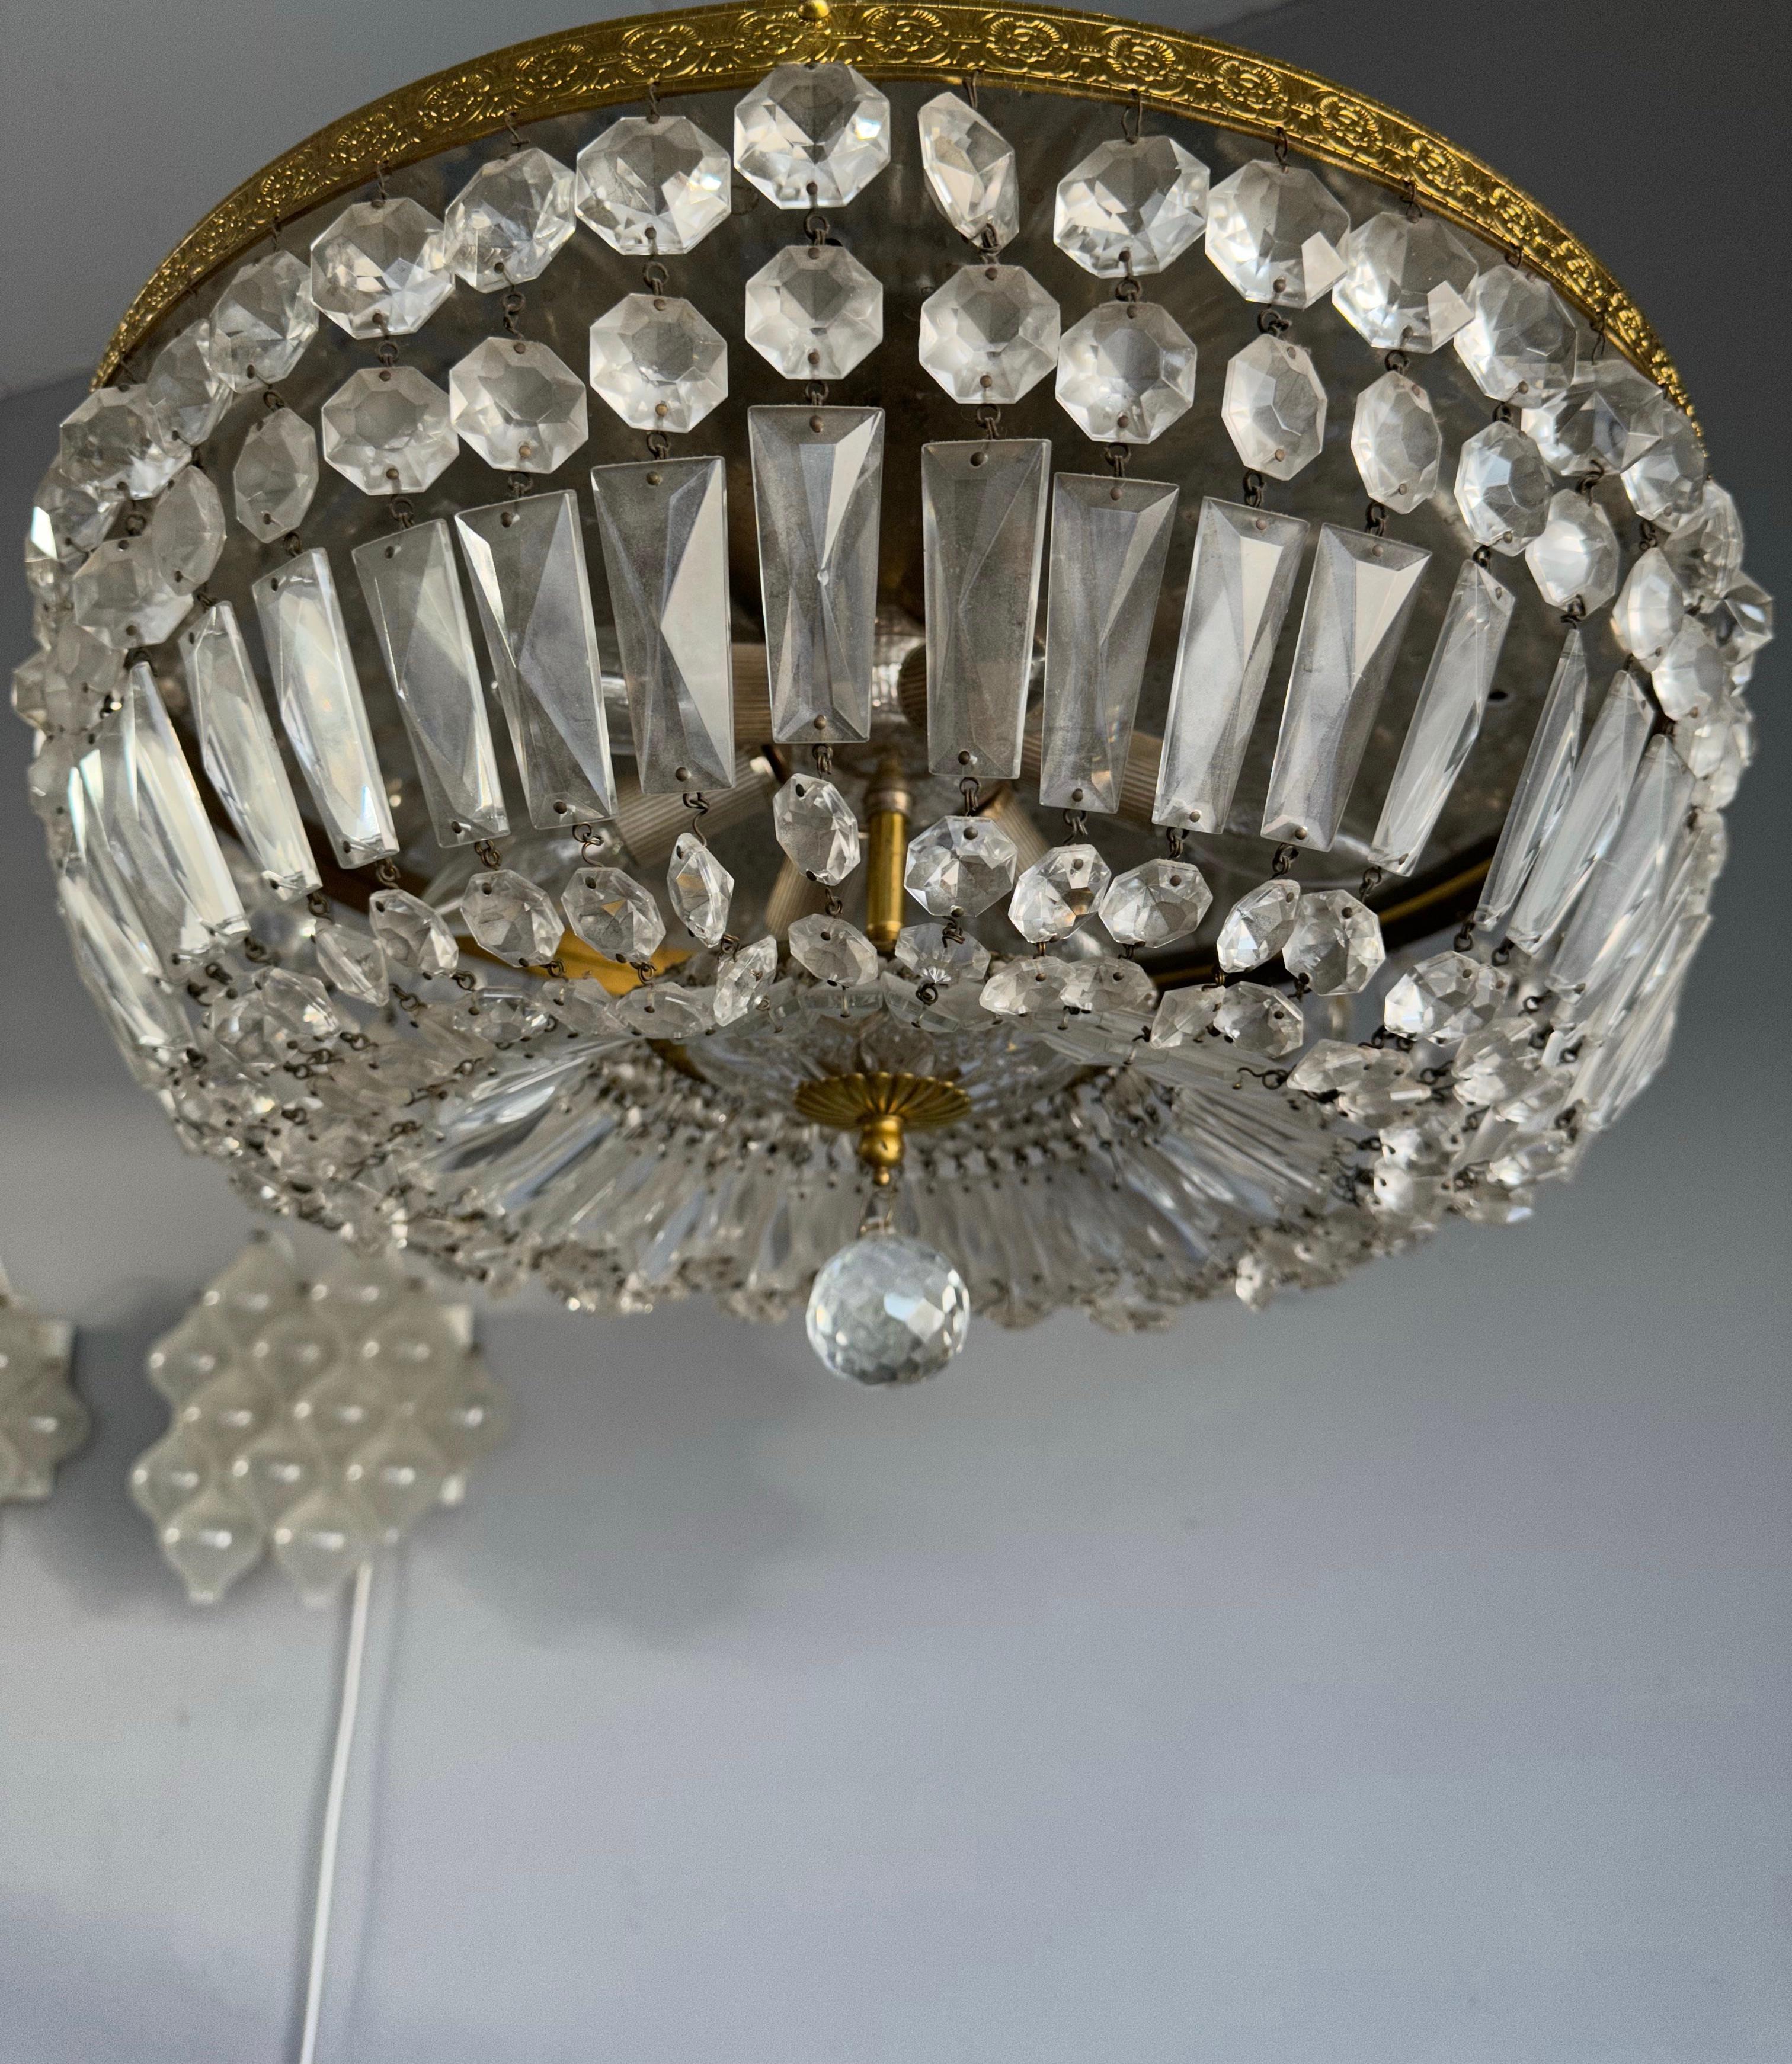 Beautiful and good condition, six light ceiling lamp.

If you are looking for a large size, elegant and well made flush mount to grace your hallway, landing or bedroom then this vintage light fixture could be perfect. Both with the light switched